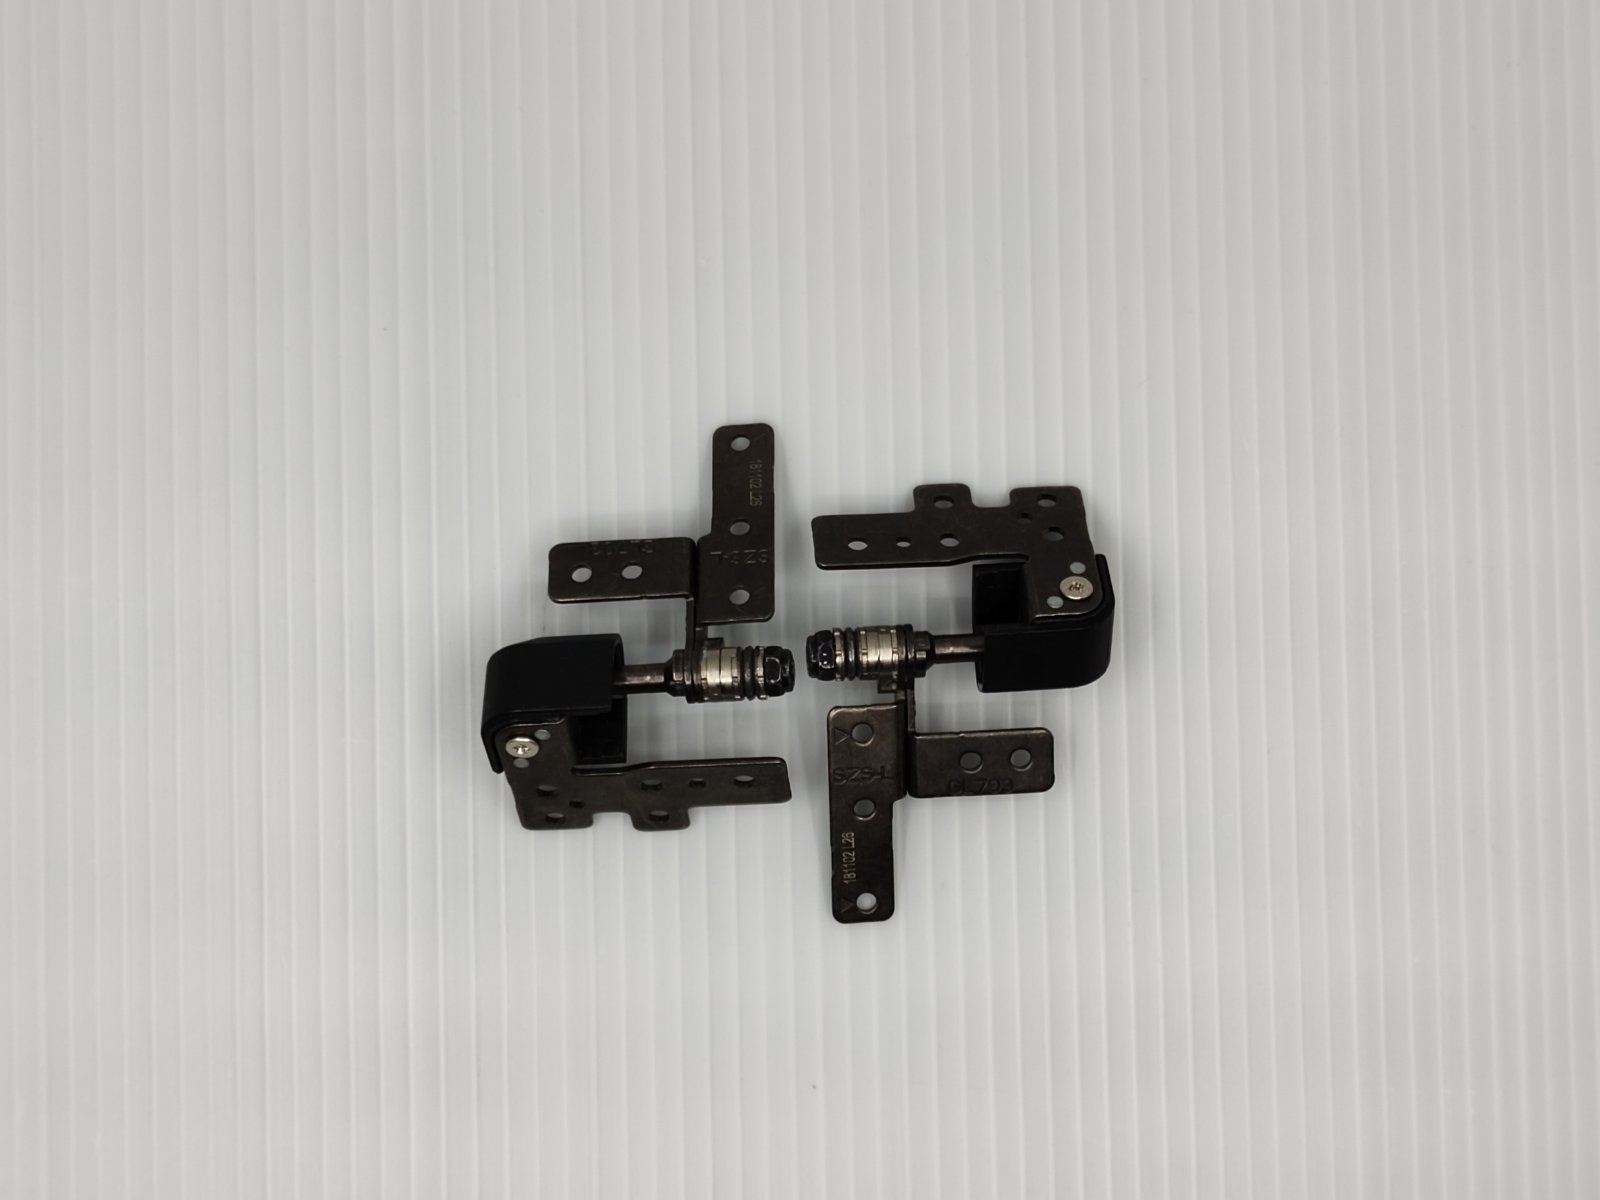 Replacement Hinge for Asus GL703VD WL